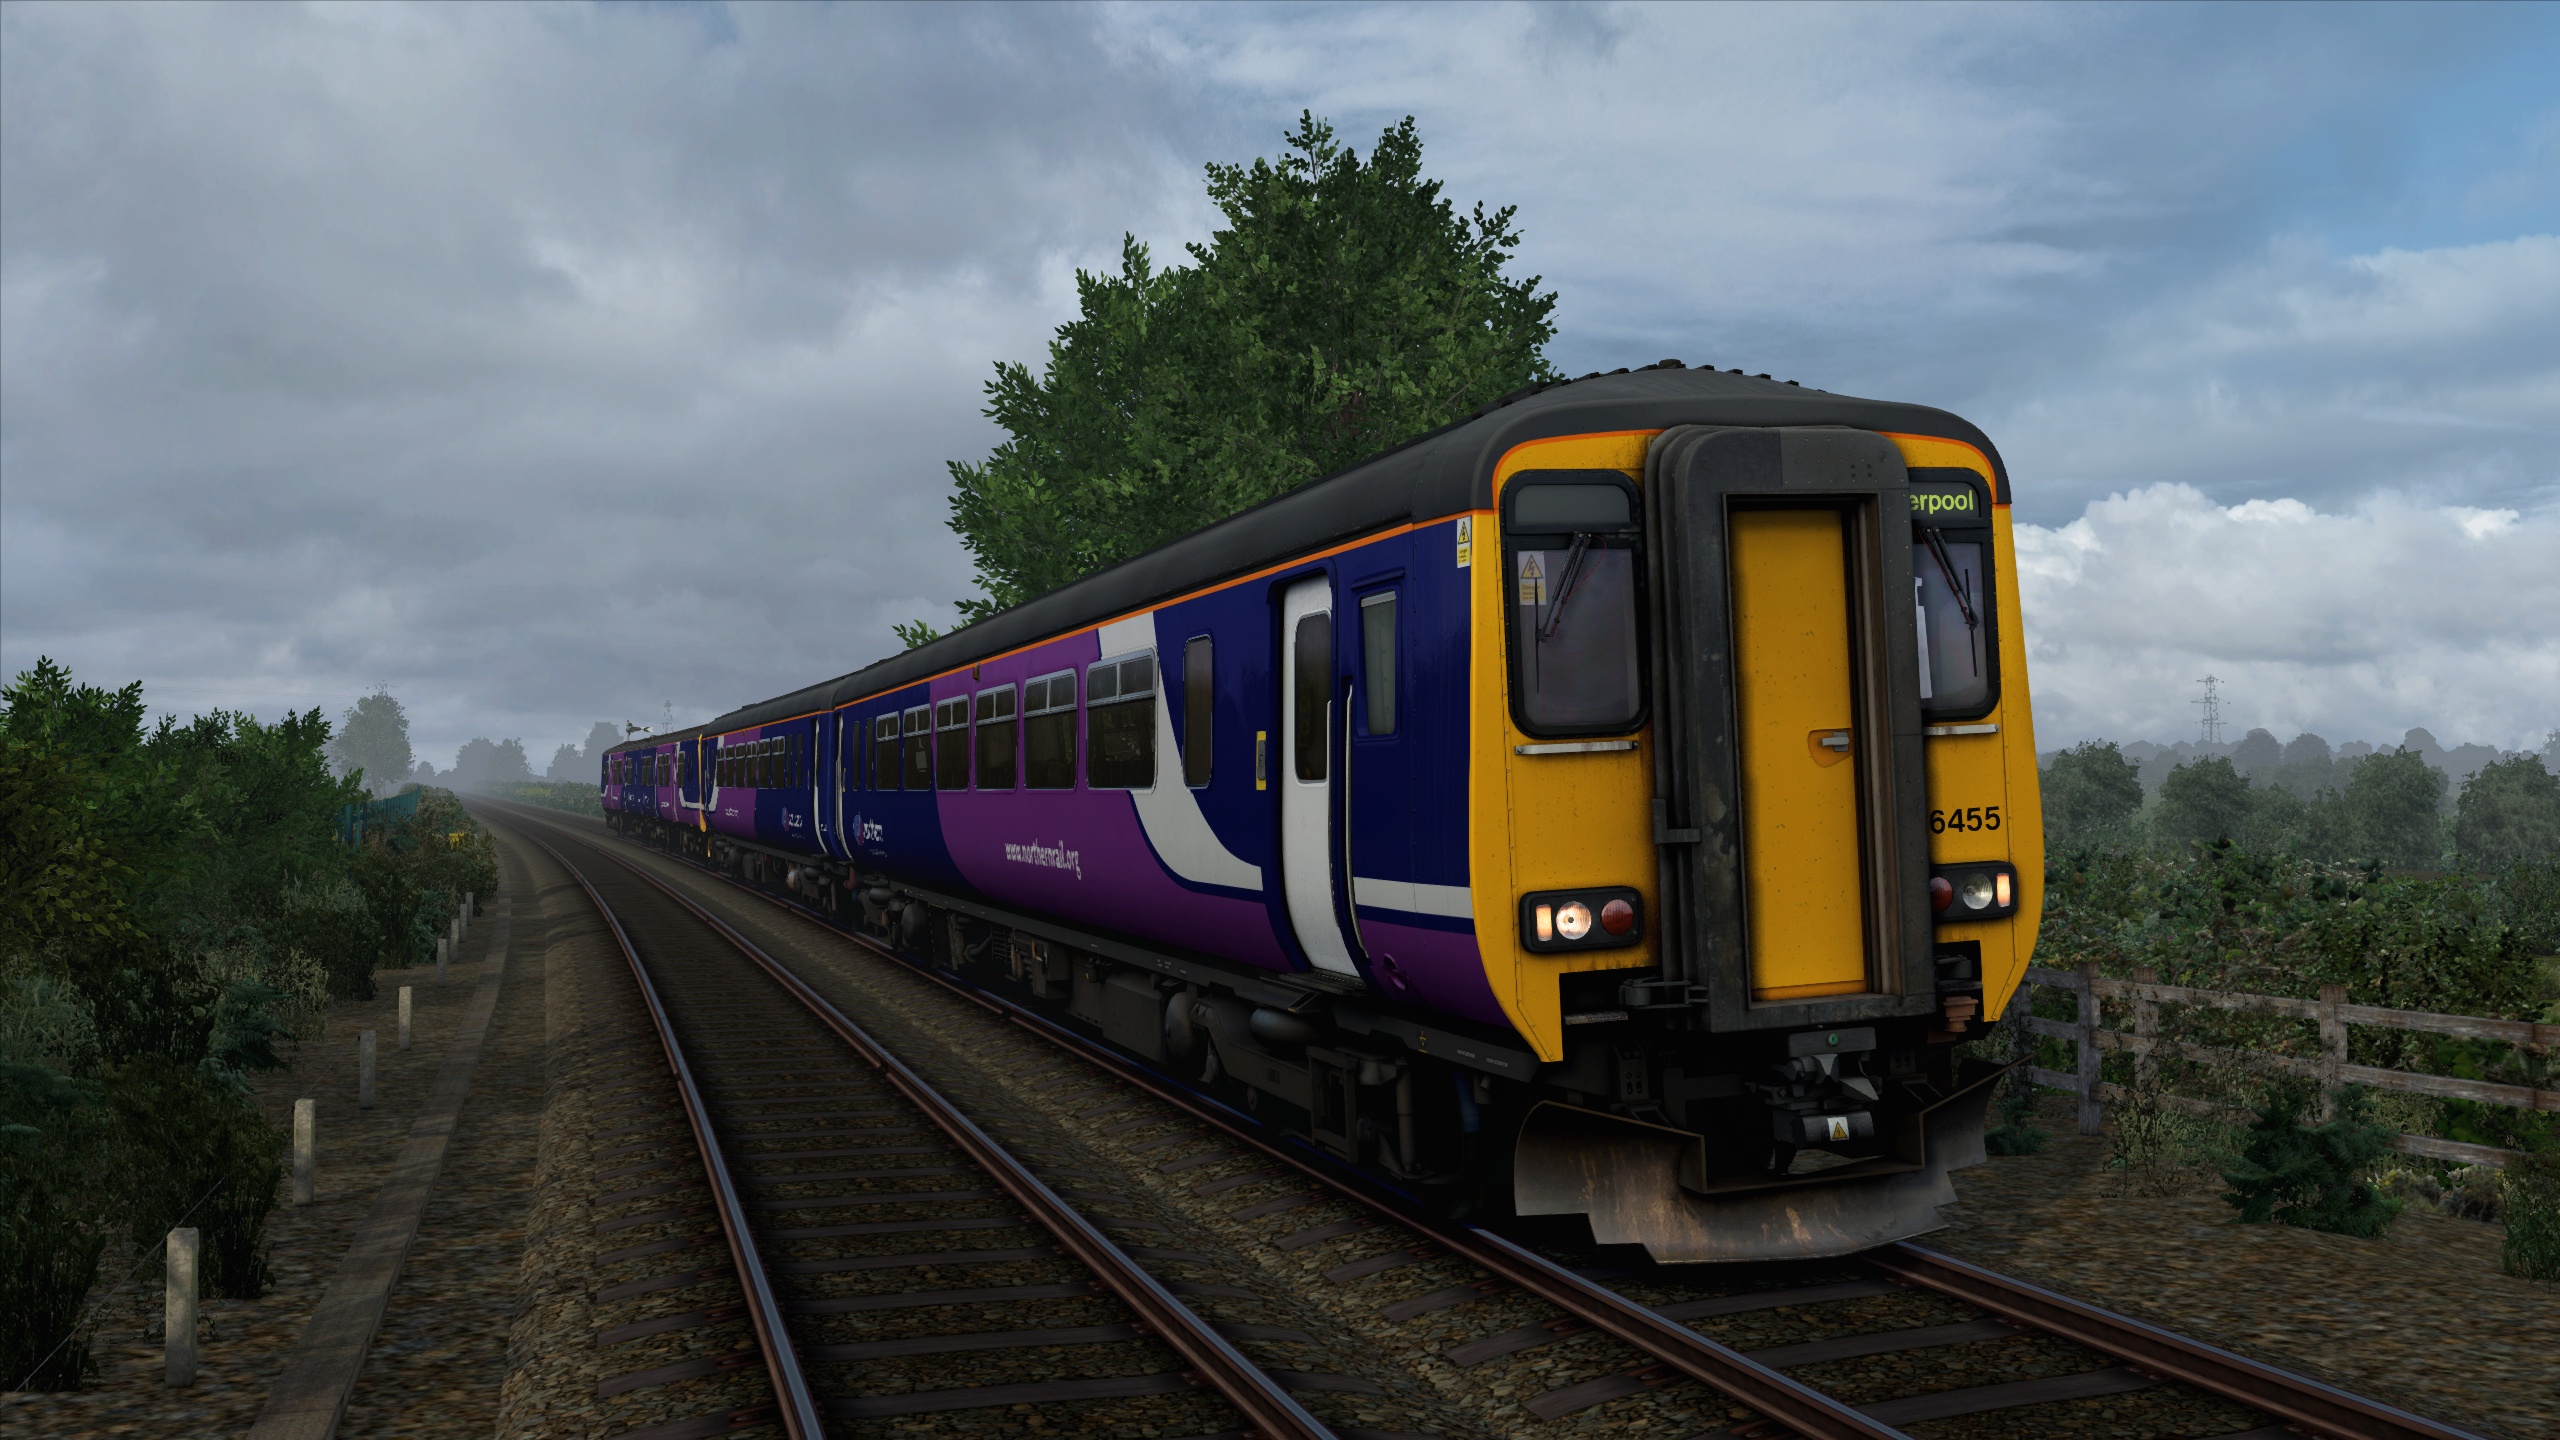 (BL) 2F61 07:03 Blackpool North to Liverpool Lime Street (2015)